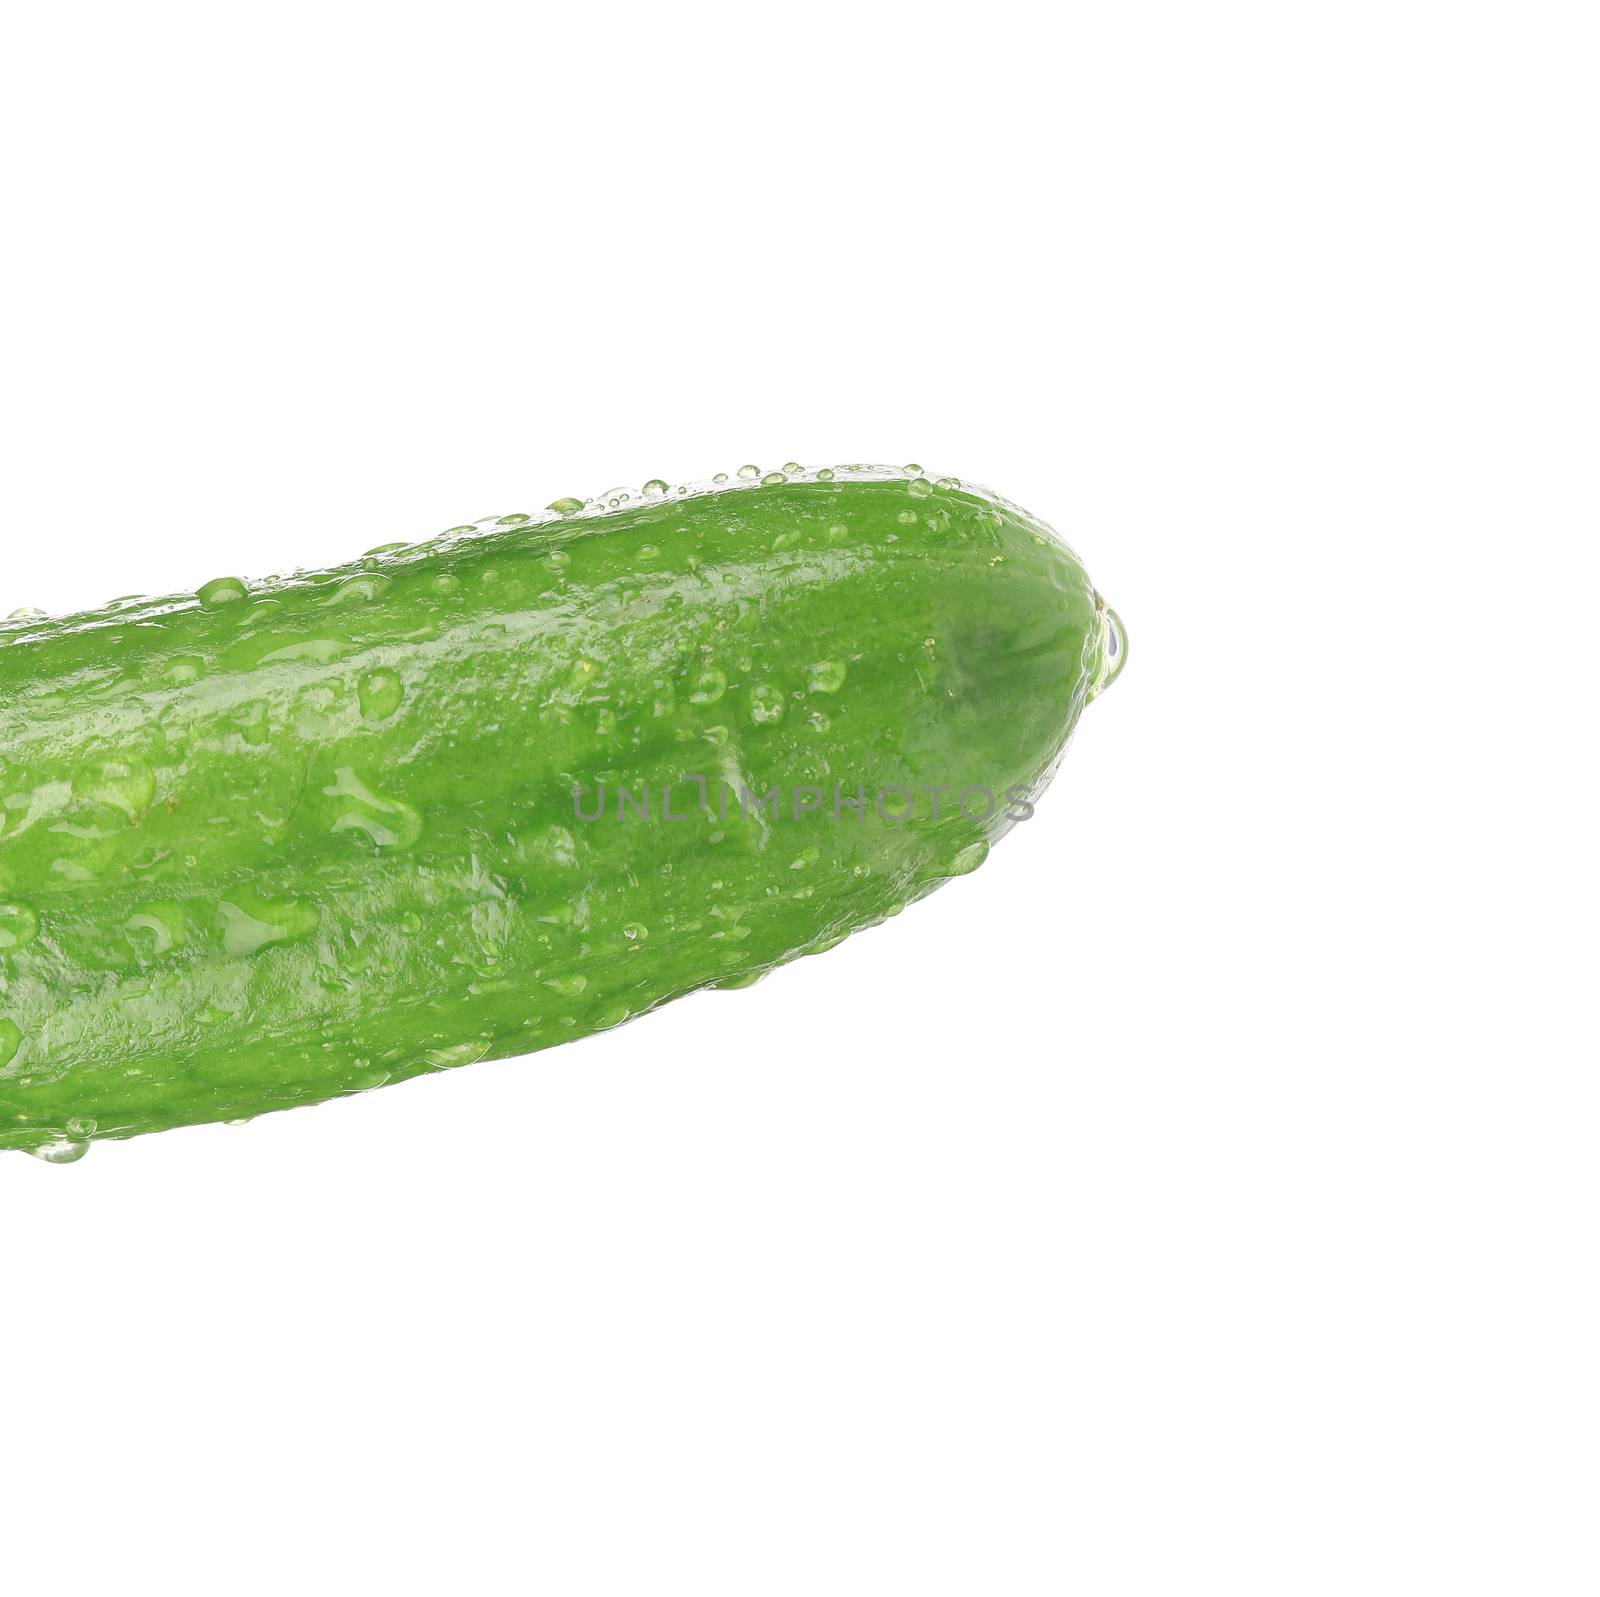 Fresh cucumber with water drops. Isolated on a white background.